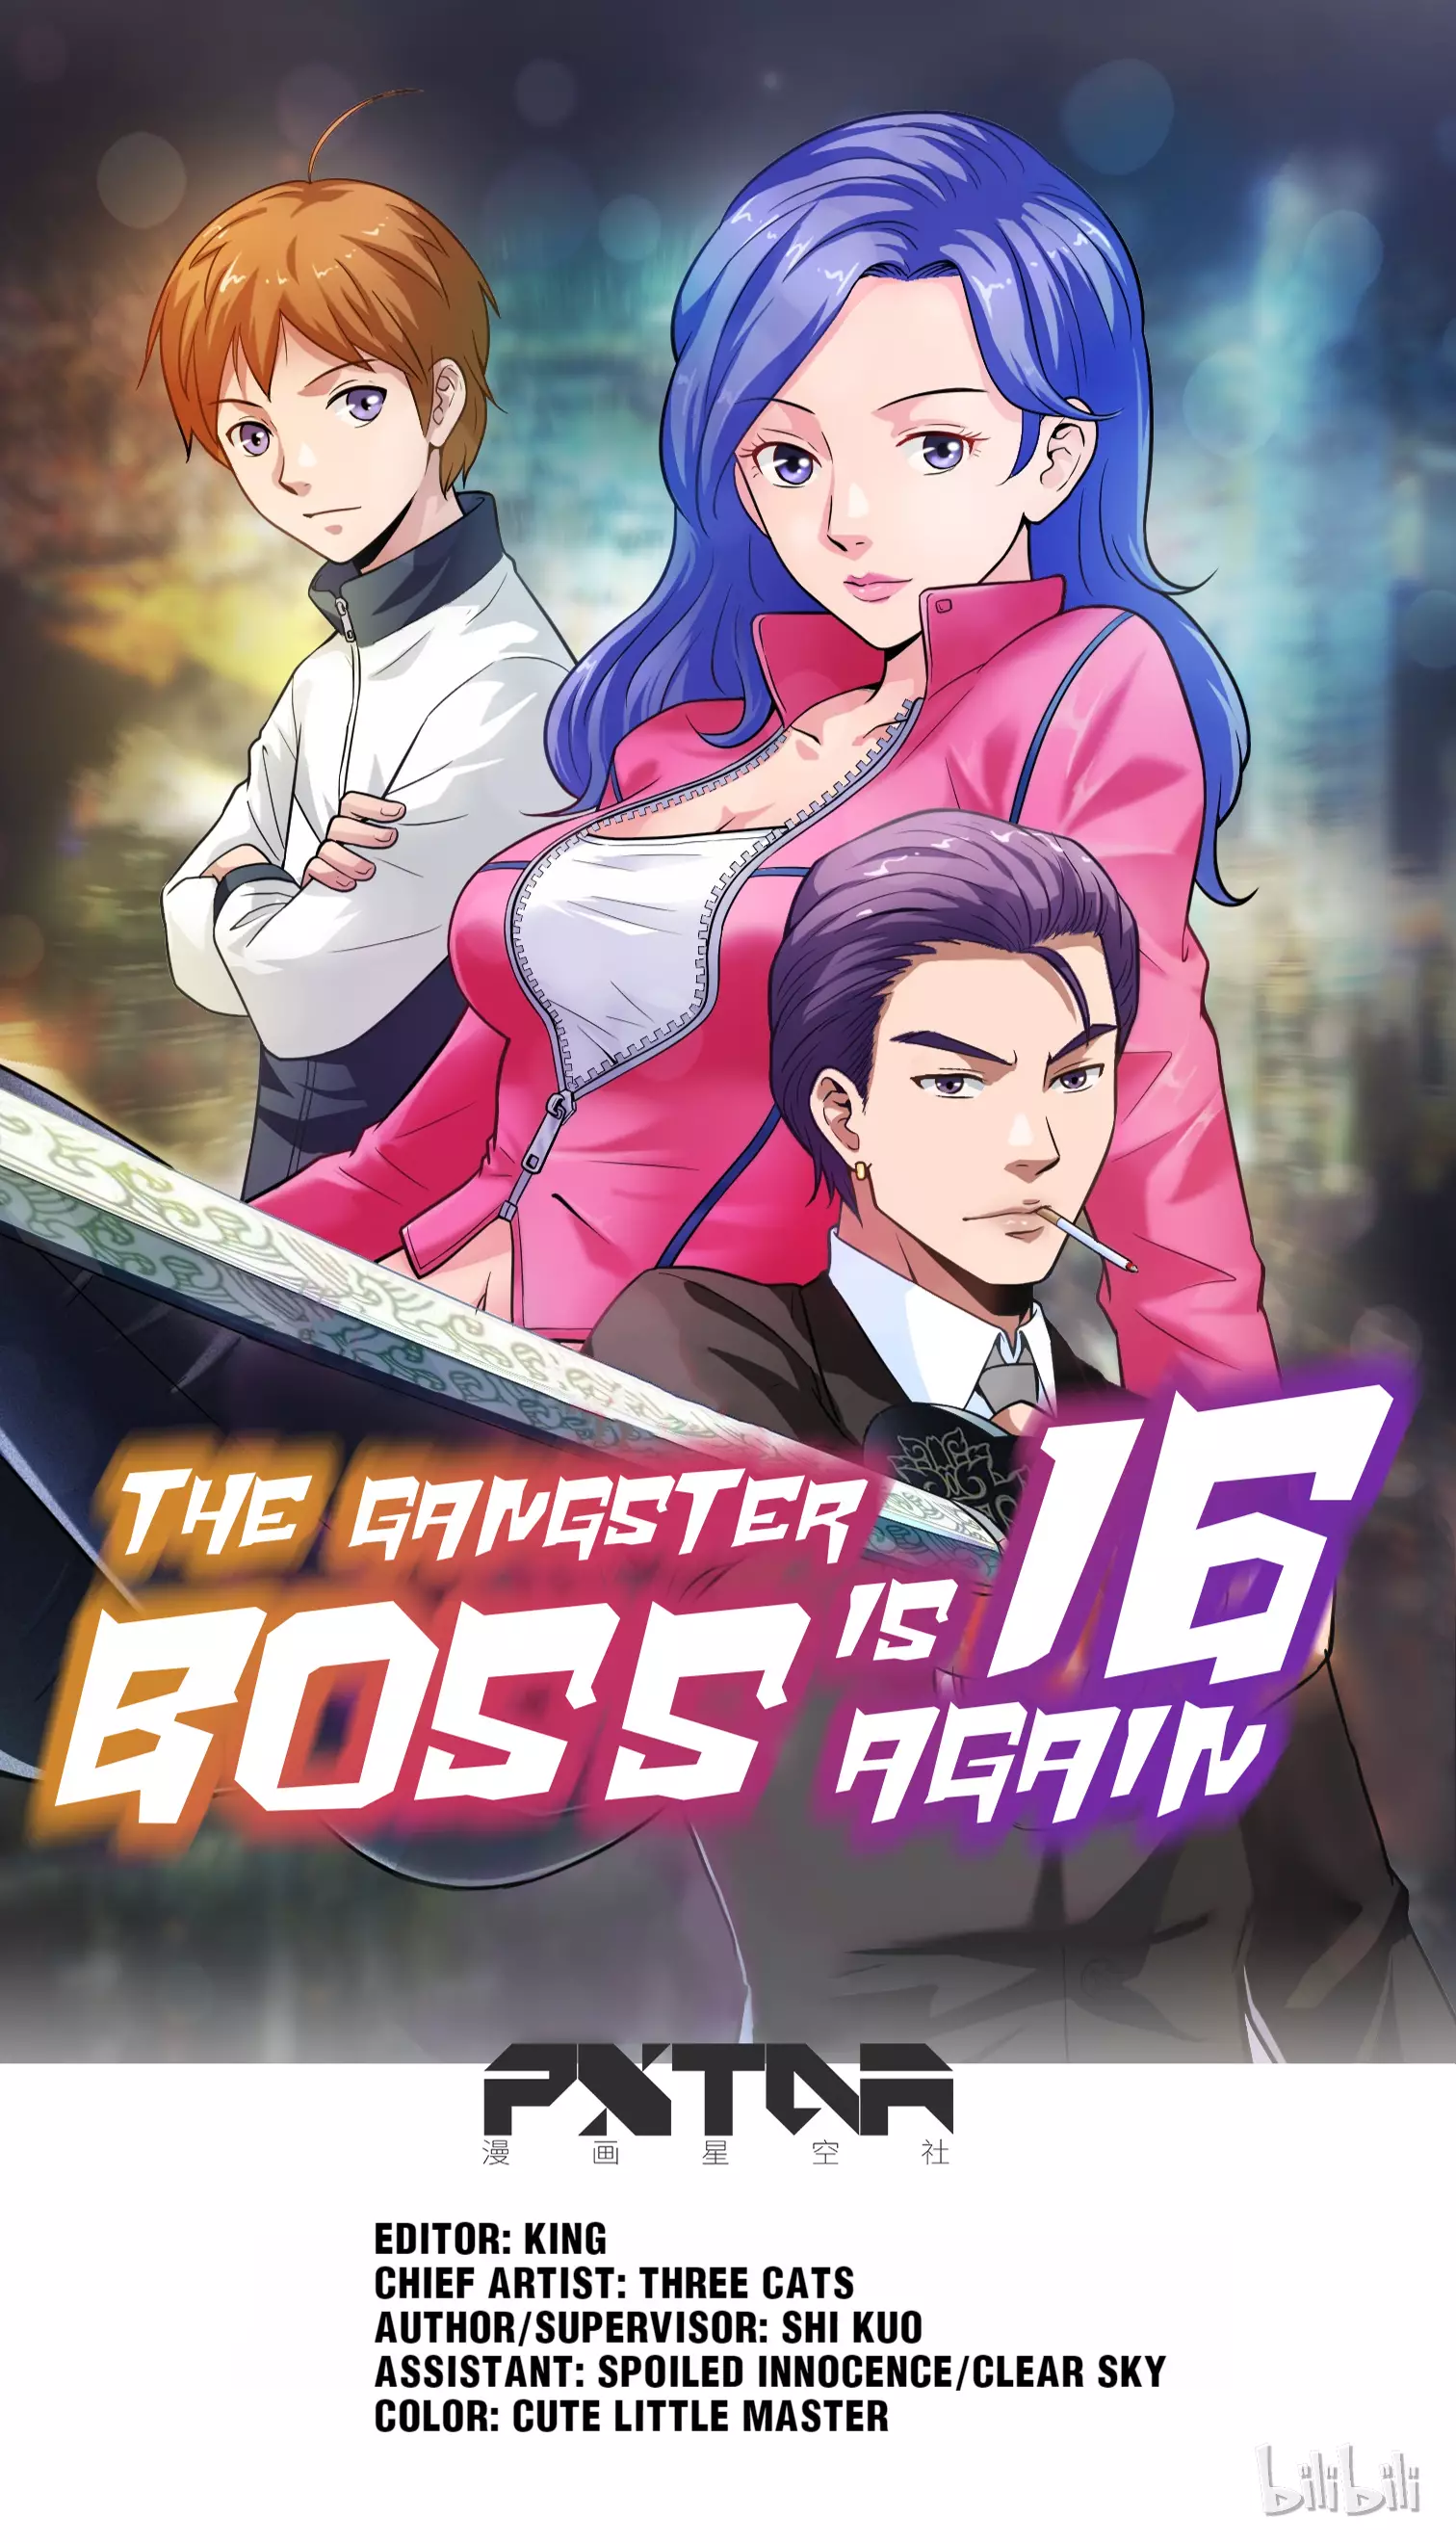 The Gangster Boss Is 16 Again - 21 page 1-8927c4aa